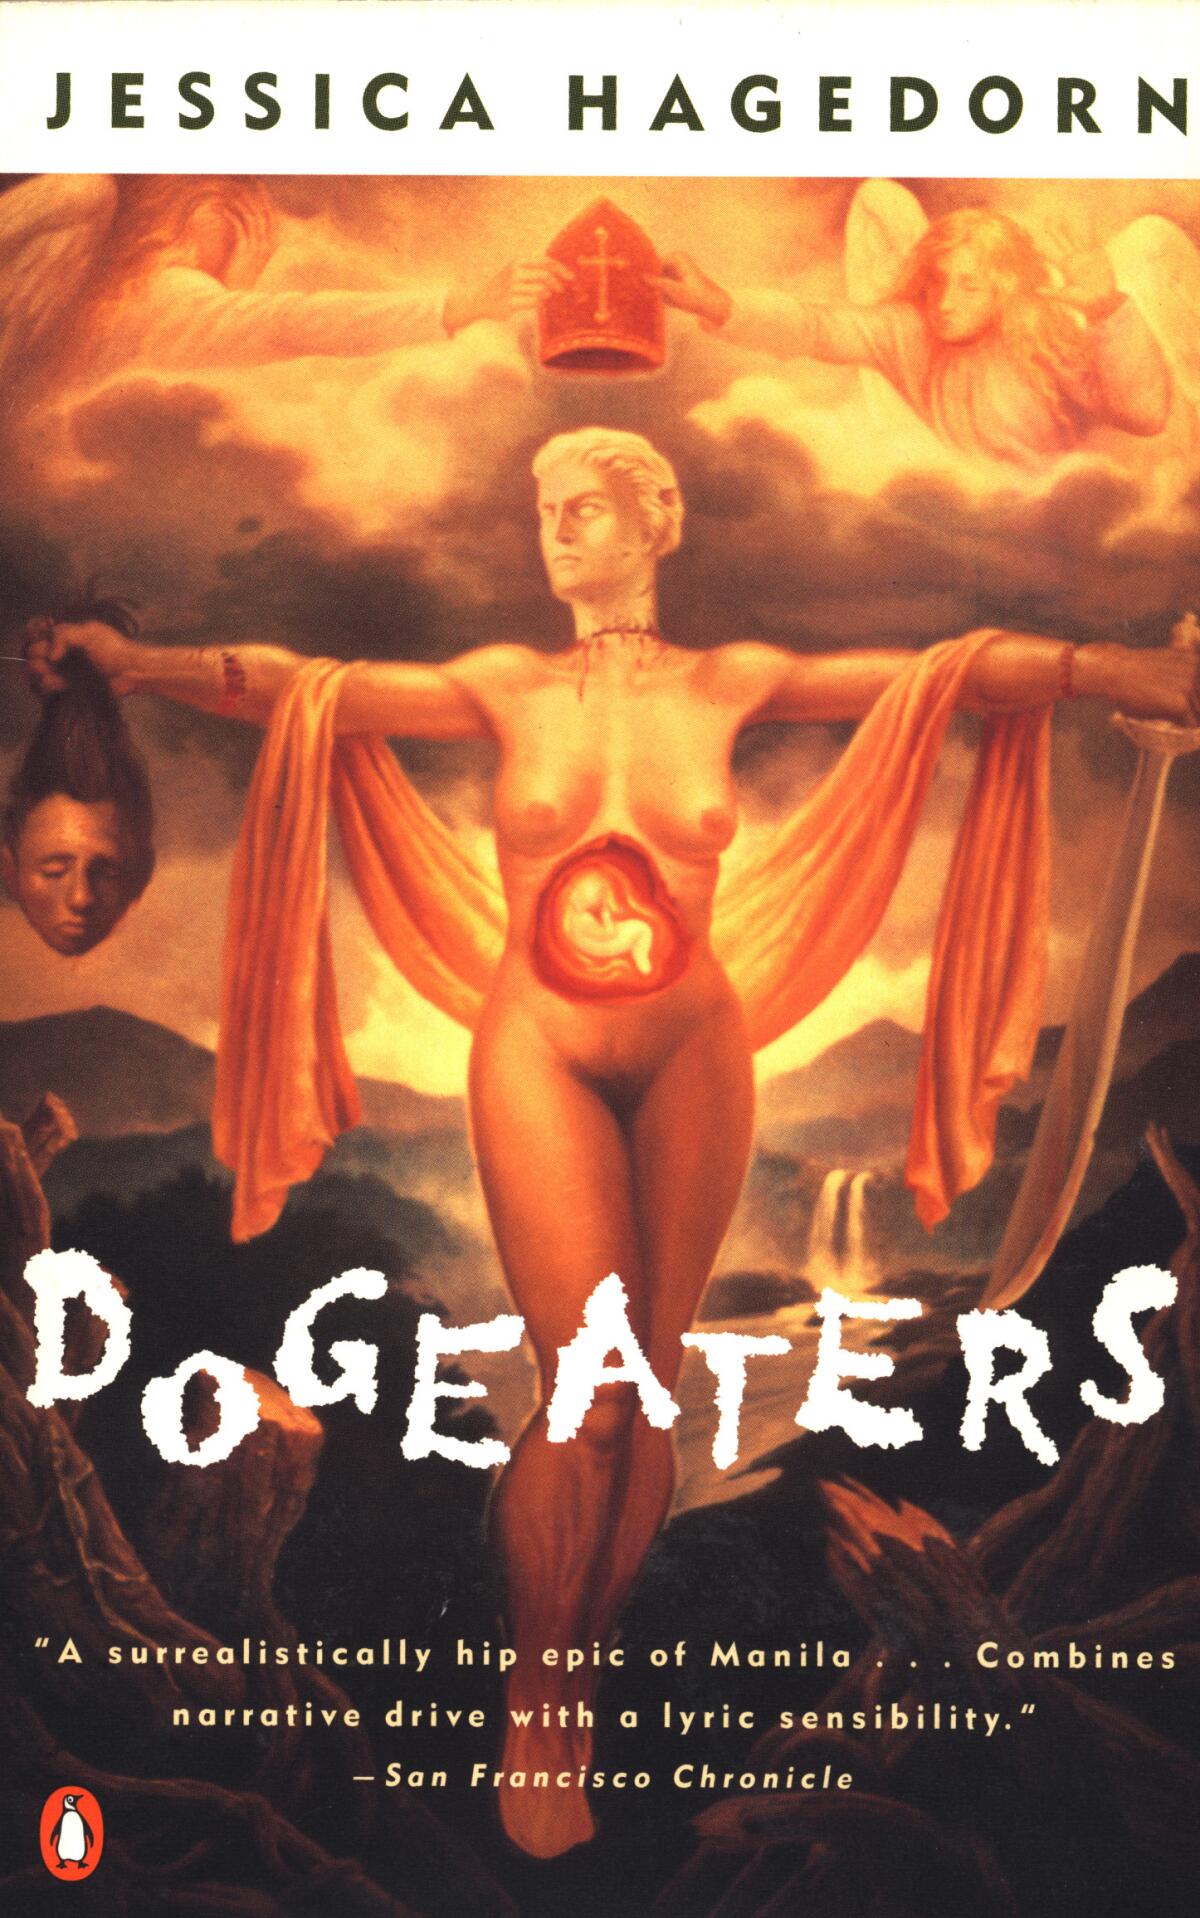 Book jacket for "Dogeaters" by Jessica Hagedorn